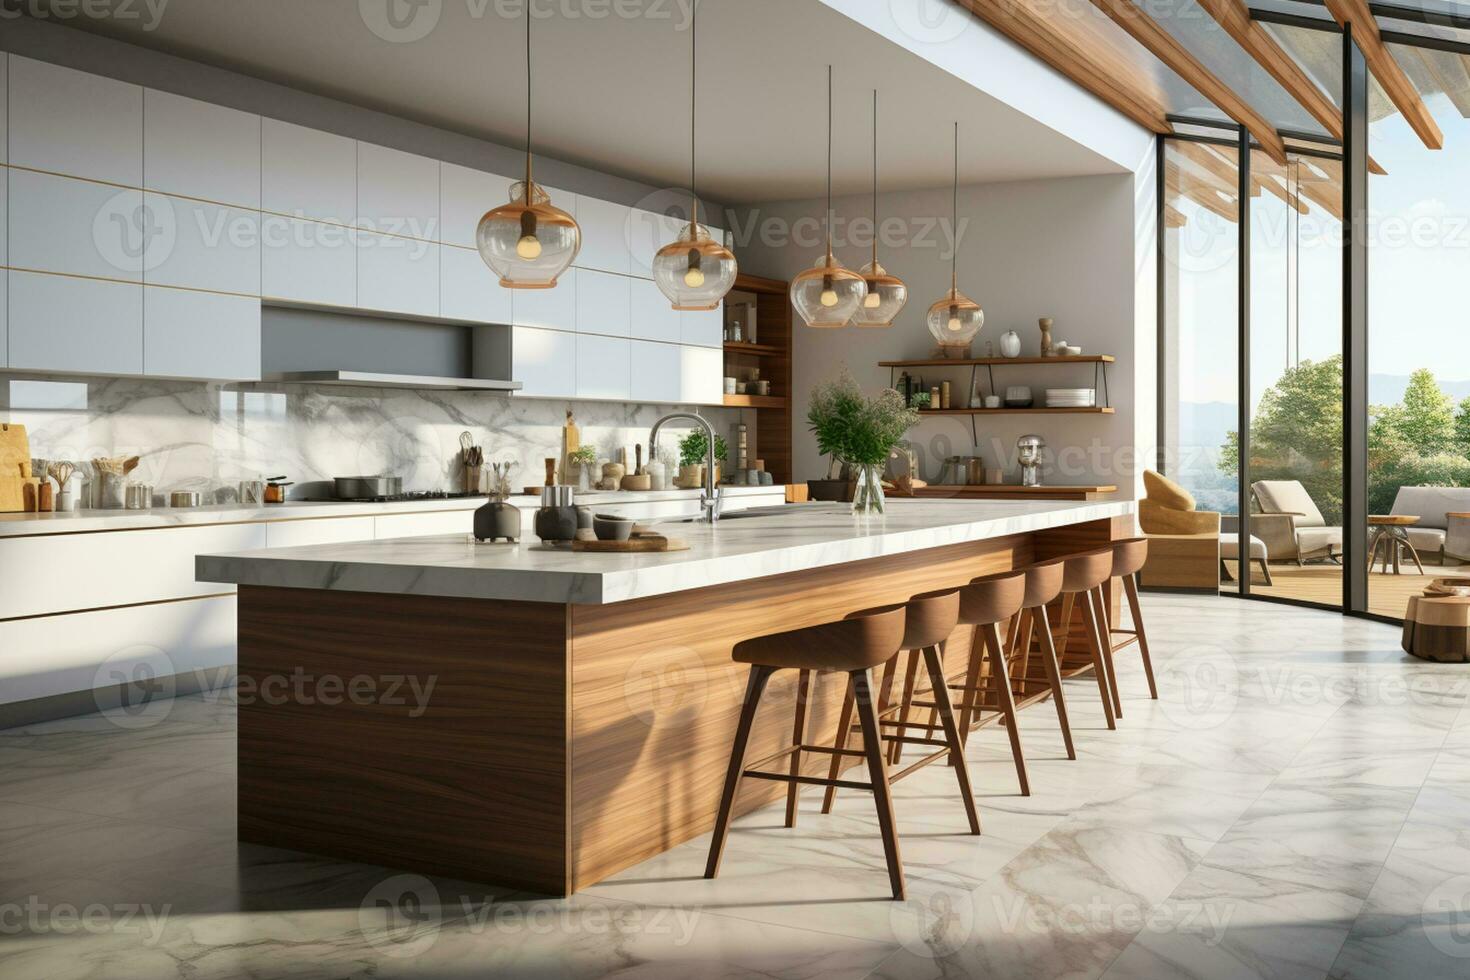 https://static.vecteezy.com/system/resources/previews/026/311/095/non_2x/trendy-and-elegant-white-kitchen-in-a-high-class-luxury-home-ai-generated-photo.jpg